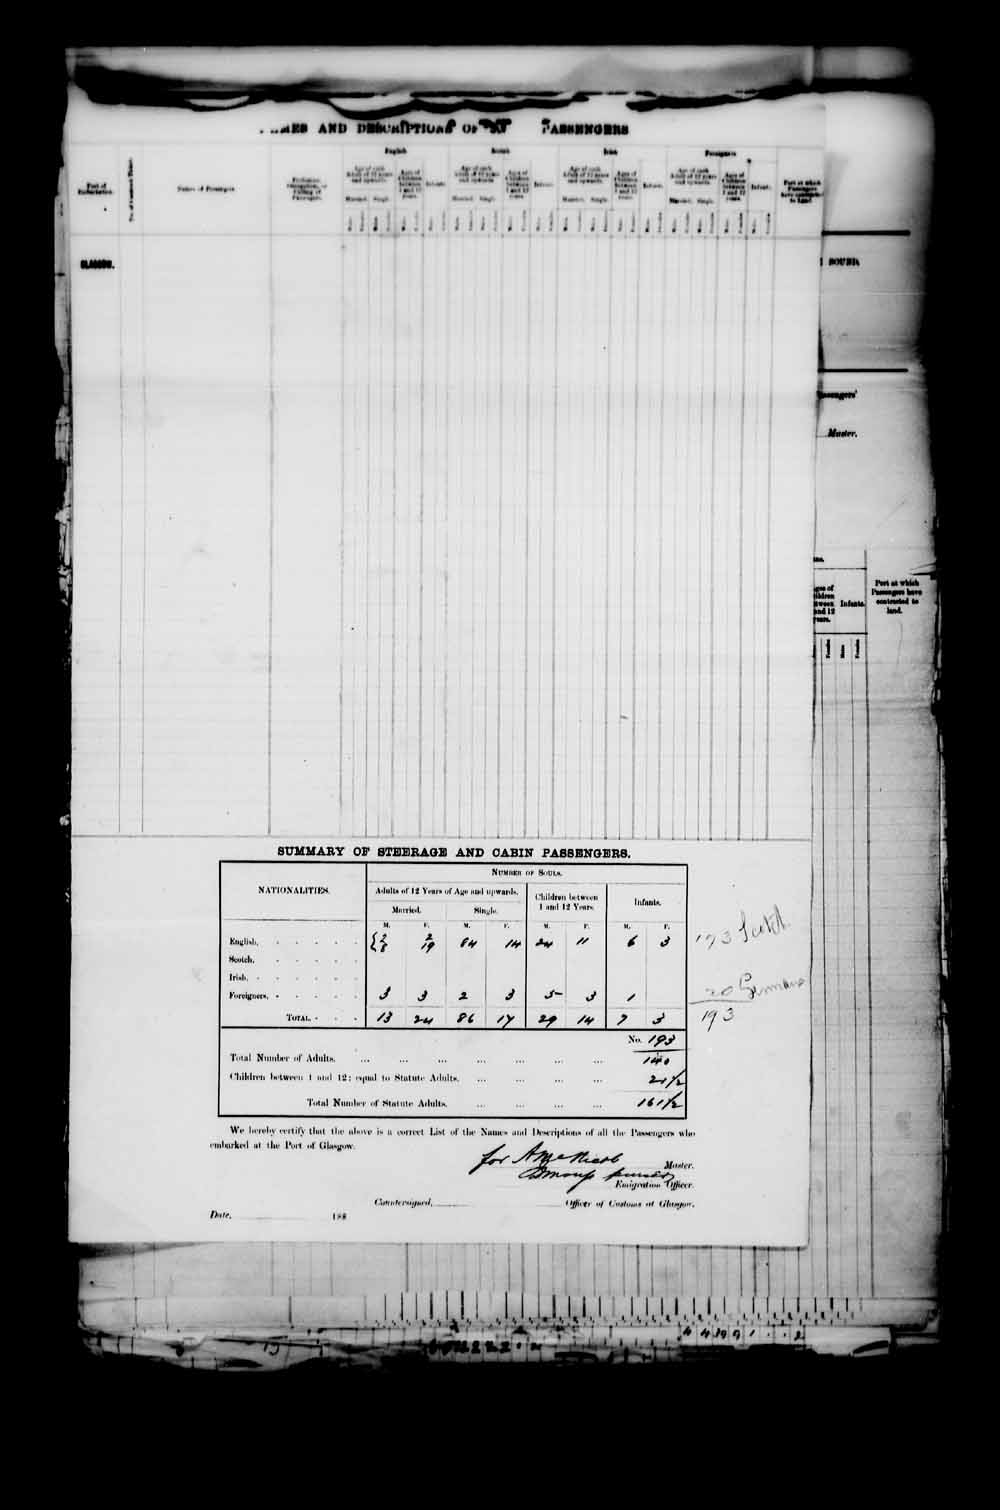 Digitized page of Passenger Lists for Image No.: e003546732